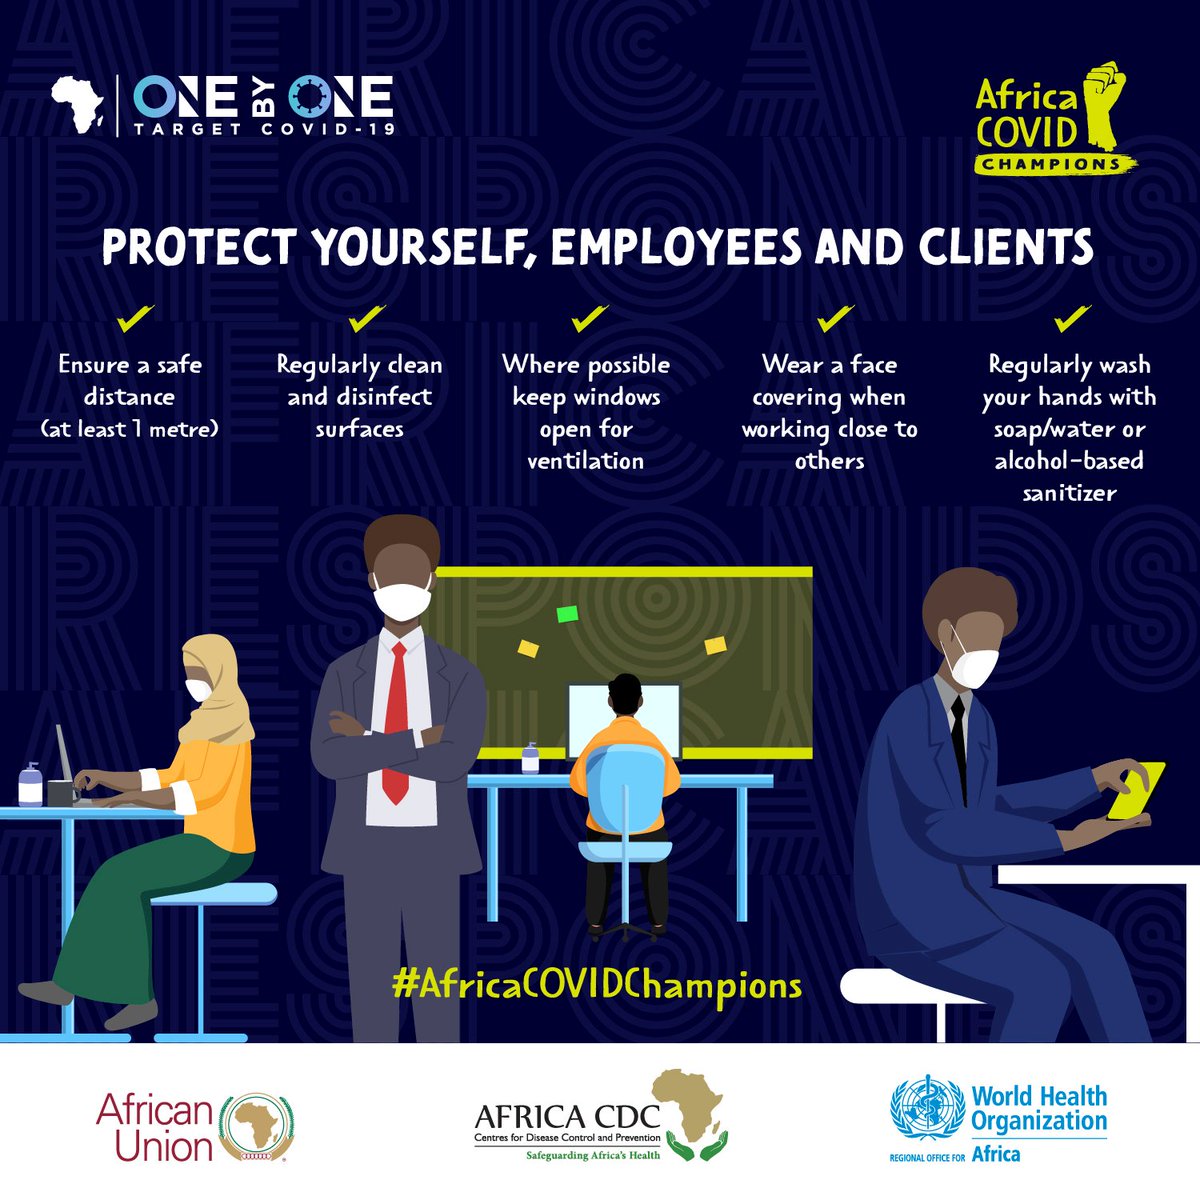 Create a safe workspace for you and your colleagues as we all work together to beat #COVID19 #AfricaCOVIDChampions